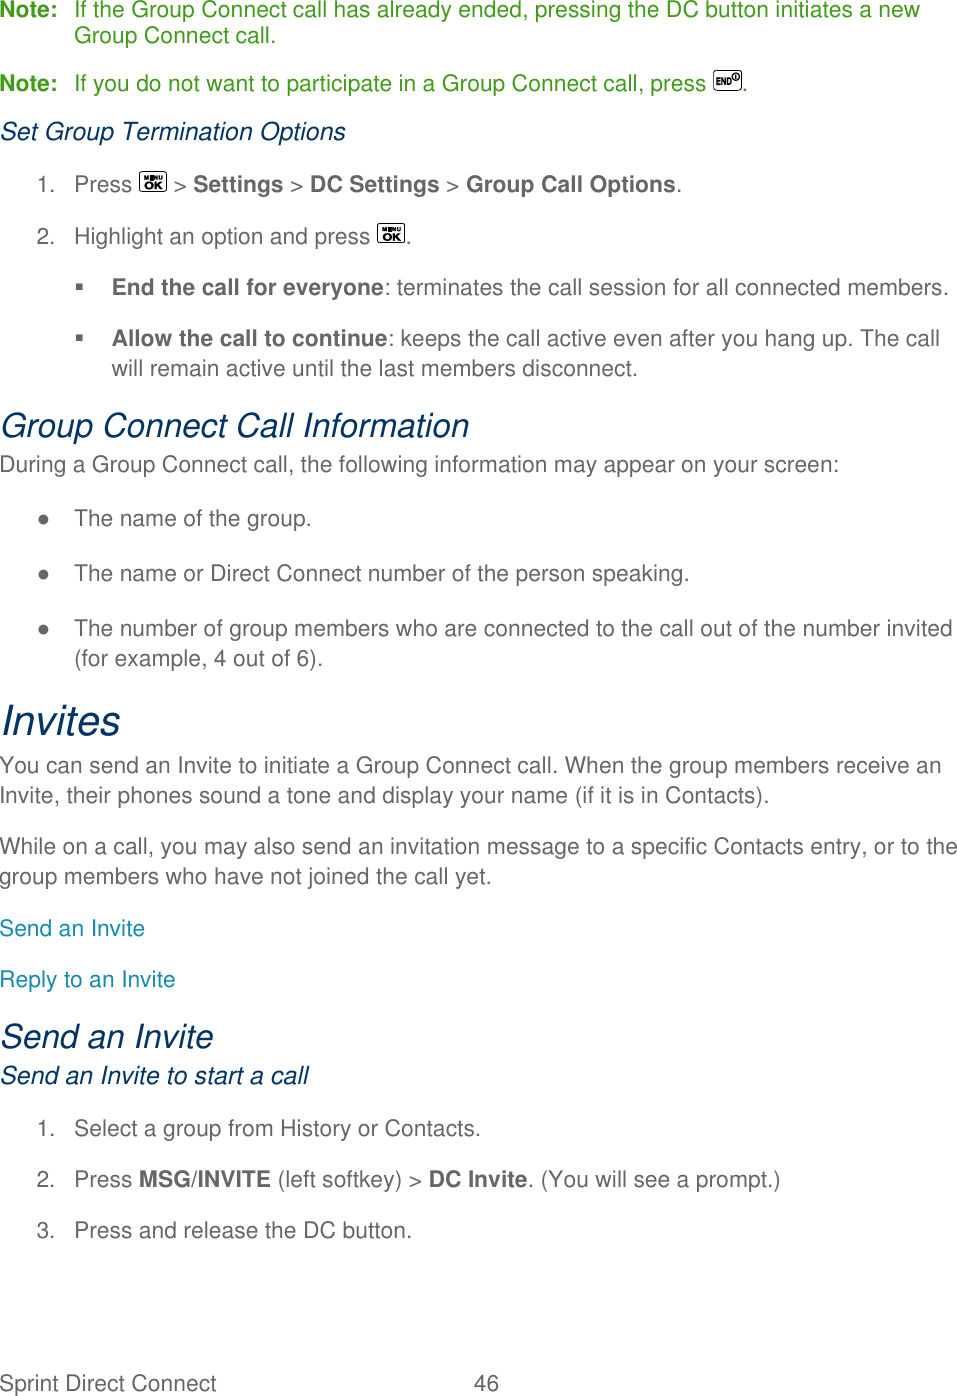  Sprint Direct Connect  46   Note:  If the Group Connect call has already ended, pressing the DC button initiates a new Group Connect call. Note:  If you do not want to participate in a Group Connect call, press  . Set Group Termination Options 1.  Press   &gt; Settings &gt; DC Settings &gt; Group Call Options. 2.  Highlight an option and press  .  End the call for everyone: terminates the call session for all connected members.  Allow the call to continue: keeps the call active even after you hang up. The call will remain active until the last members disconnect. Group Connect Call Information During a Group Connect call, the following information may appear on your screen: ●  The name of the group. ●  The name or Direct Connect number of the person speaking. ●  The number of group members who are connected to the call out of the number invited (for example, 4 out of 6). Invites  You can send an Invite to initiate a Group Connect call. When the group members receive an Invite, their phones sound a tone and display your name (if it is in Contacts). While on a call, you may also send an invitation message to a specific Contacts entry, or to the group members who have not joined the call yet. Send an Invite Reply to an Invite Send an Invite Send an Invite to start a call 1.  Select a group from History or Contacts. 2.  Press MSG/INVITE (left softkey) &gt; DC Invite. (You will see a prompt.) 3.  Press and release the DC button. 